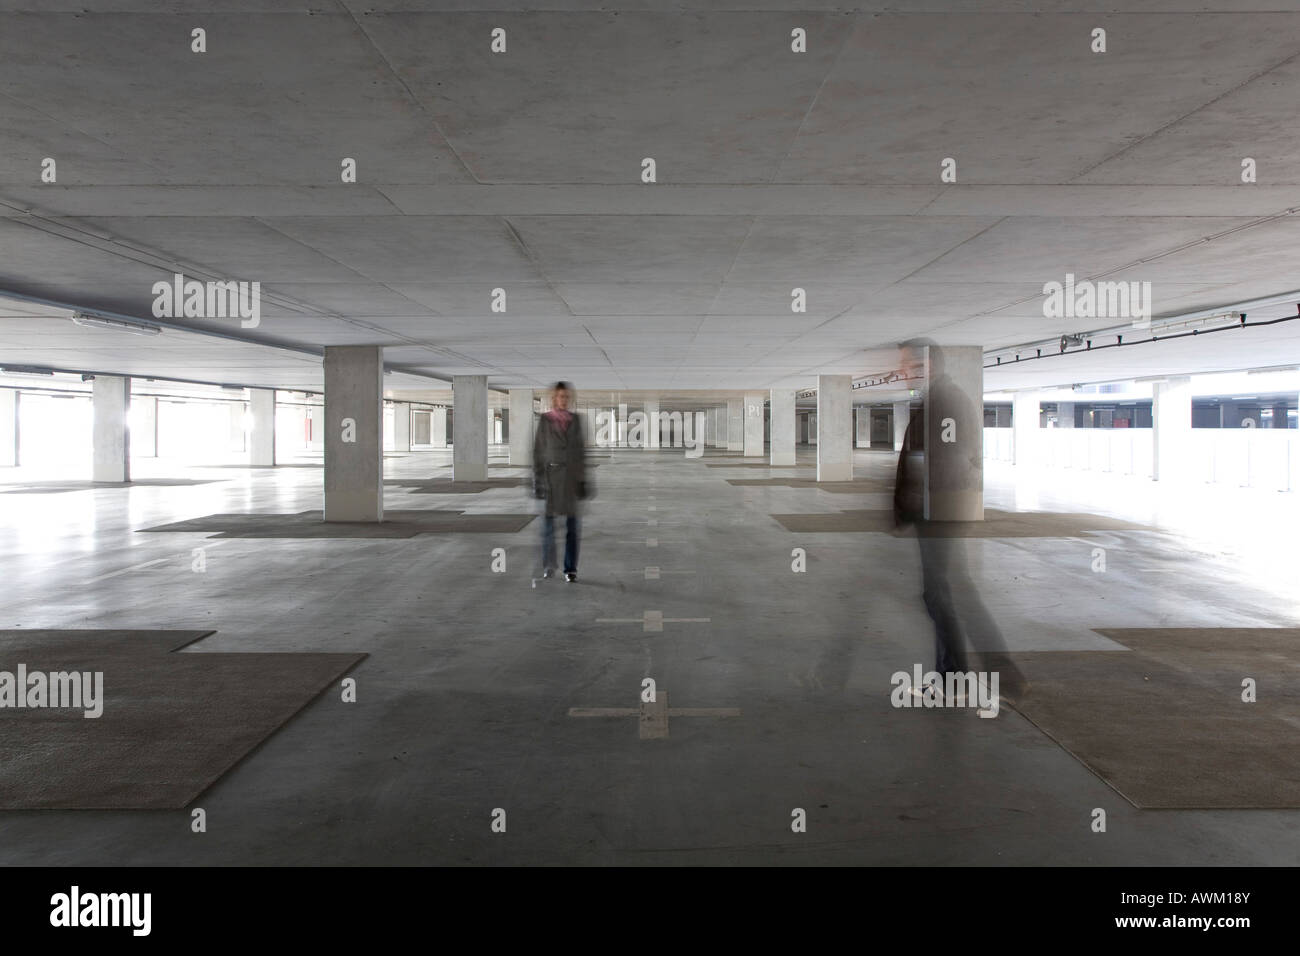 Two people in a deserted parking garage Stock Photo